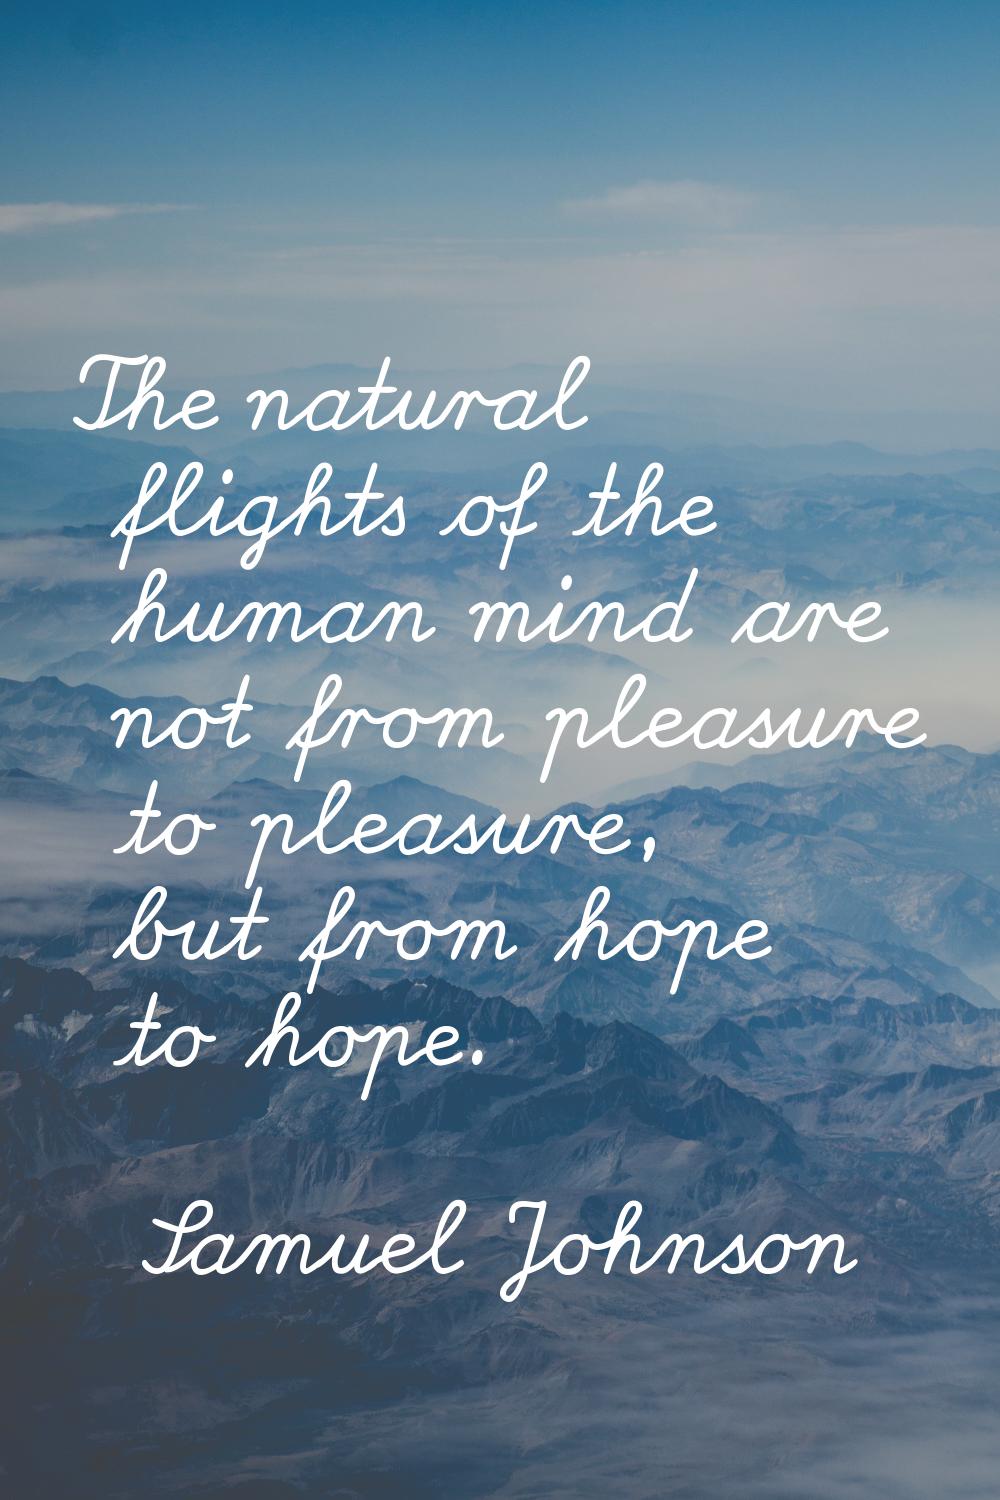 The natural flights of the human mind are not from pleasure to pleasure, but from hope to hope.